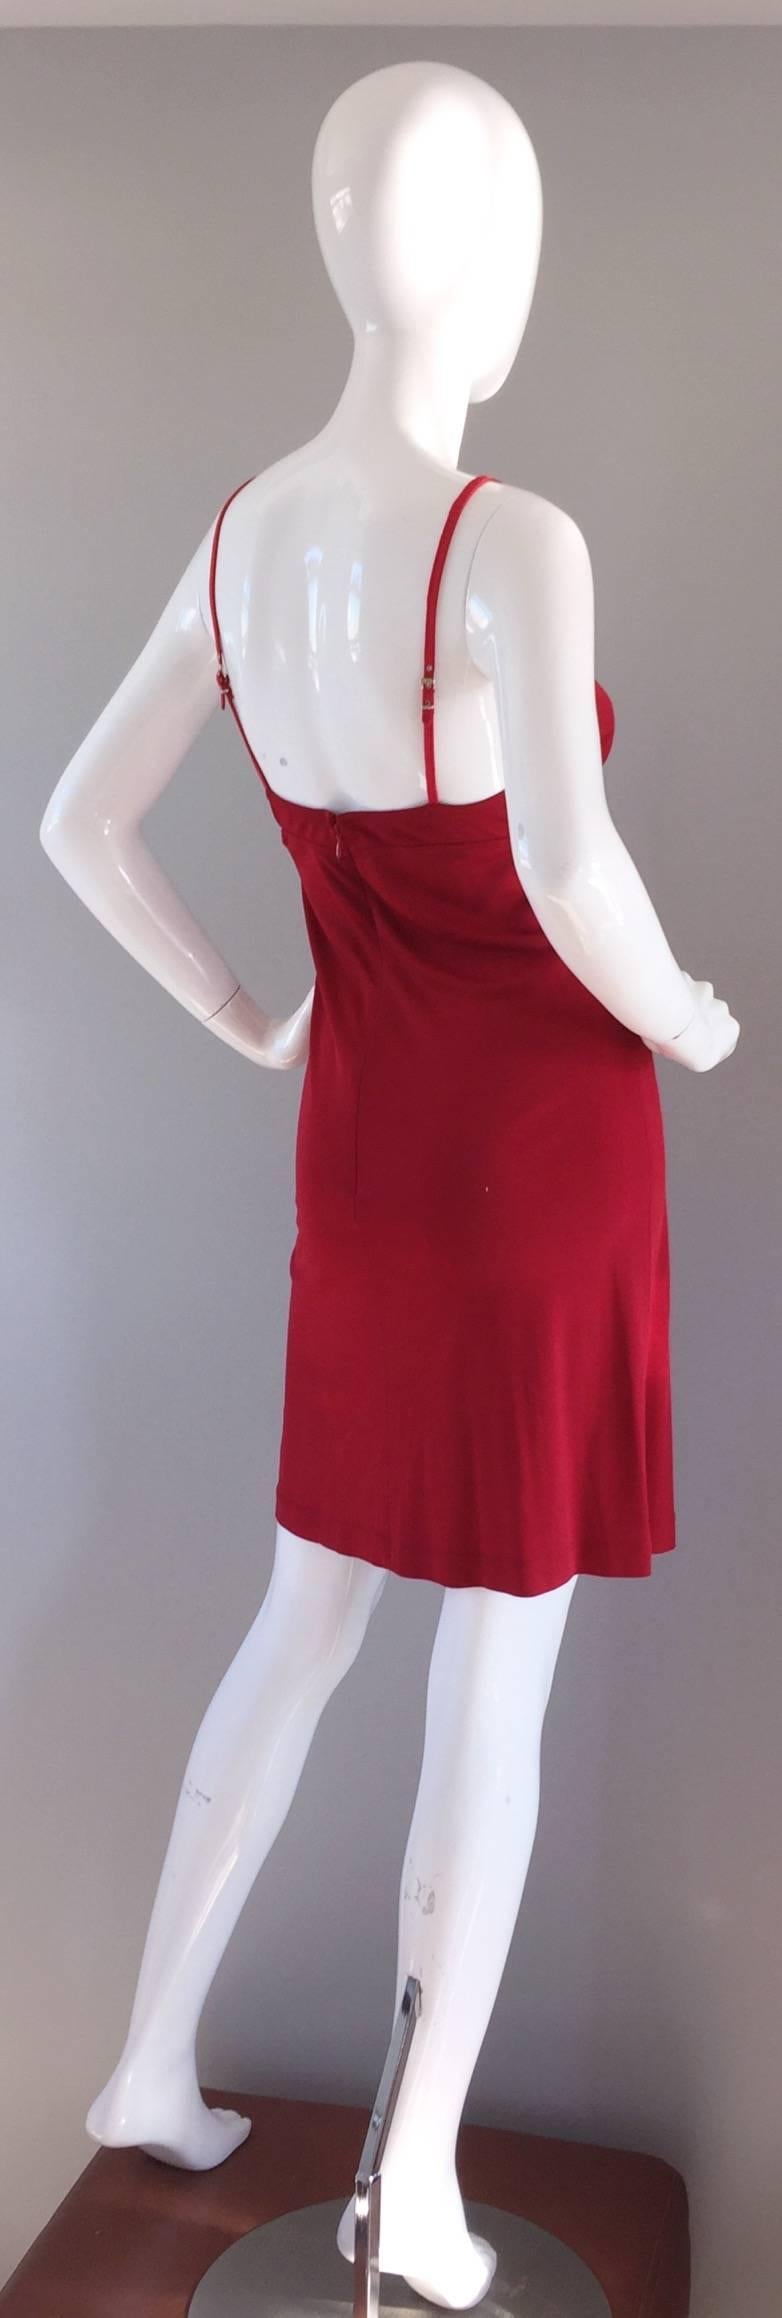 Sexy 1990s Gianfranco Ferre candy apple red rayon jersey bodycon mini dress! SO much detail, that flatters the shape like no other! Features buckles on the back straps, to adjust length. Straps are backed in leather, to ensure they stay up. Can